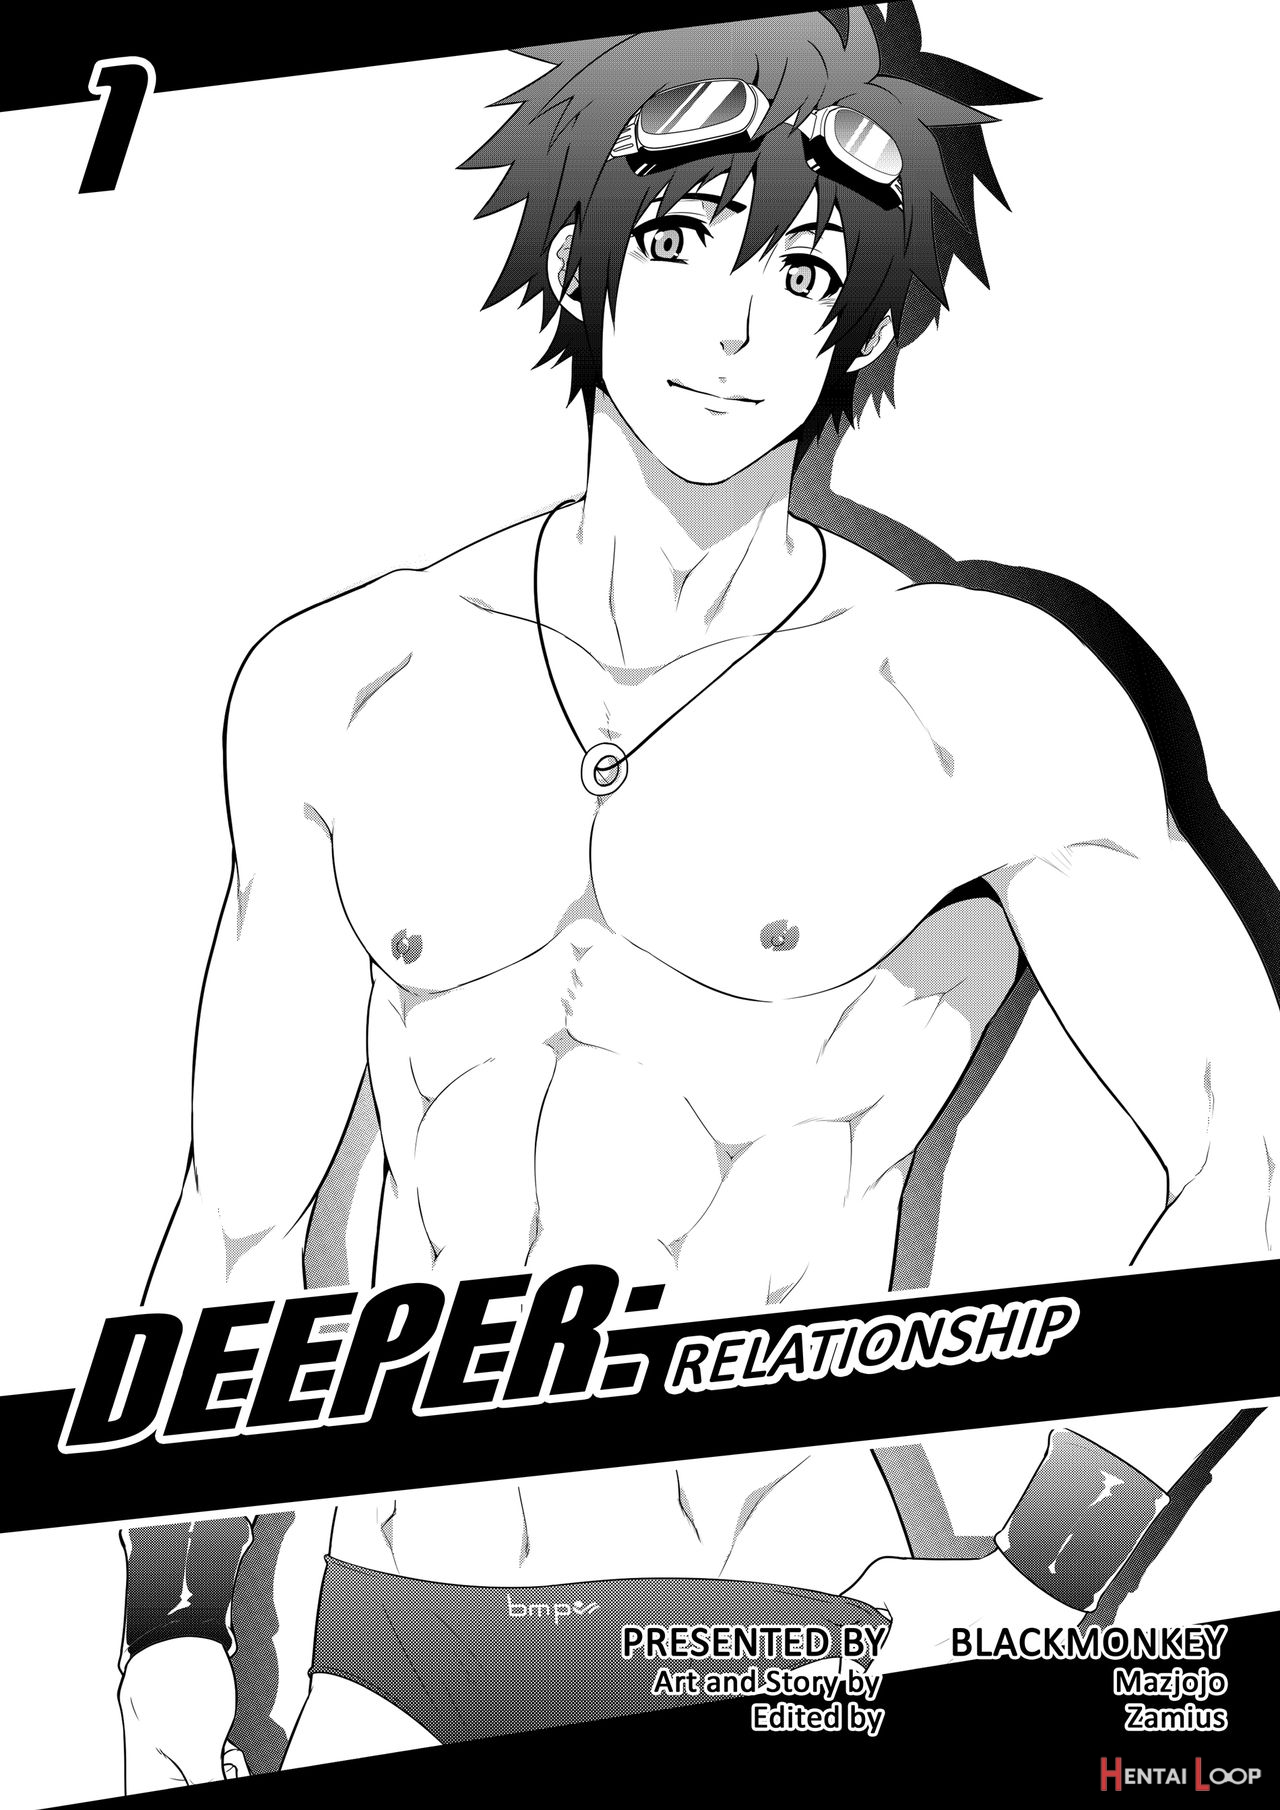 Deeper 1 Relationship page 4